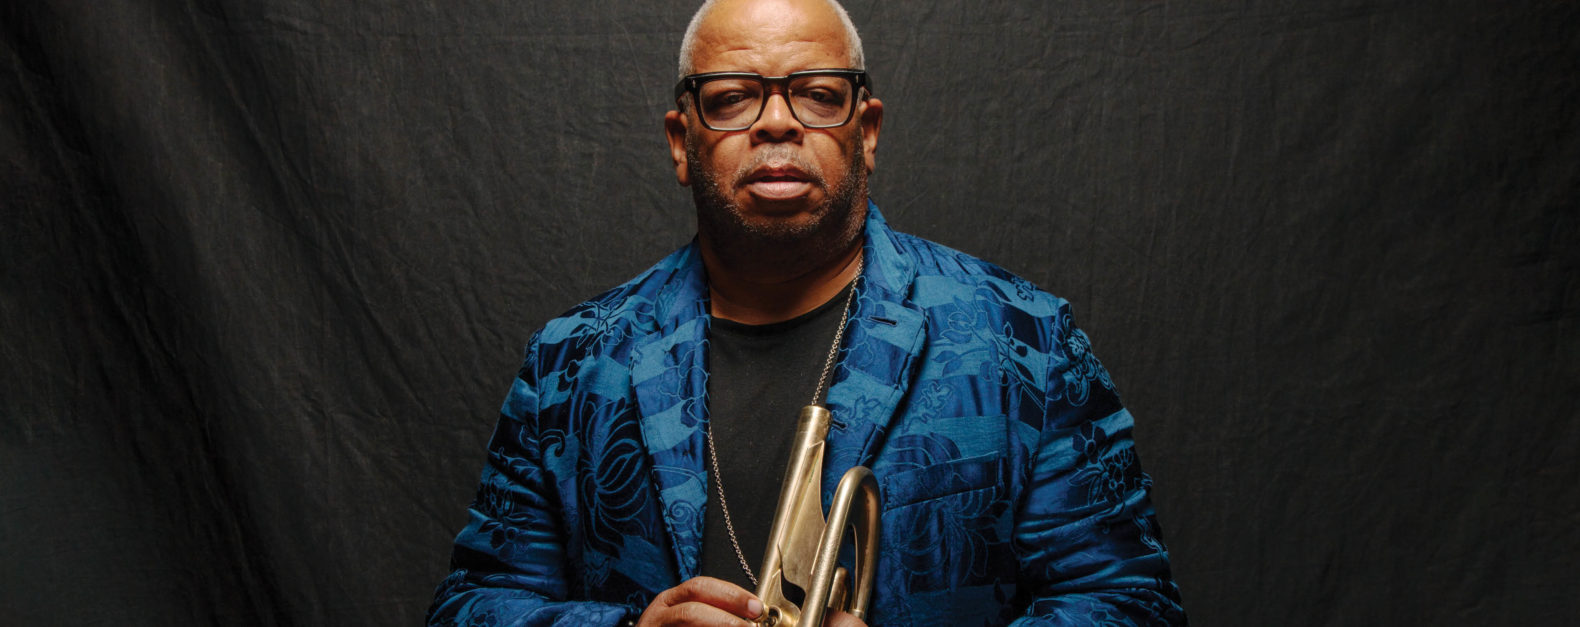 Terence Blanchard at MASS MoCA feature image, Terence Blanchard holding a trumpet